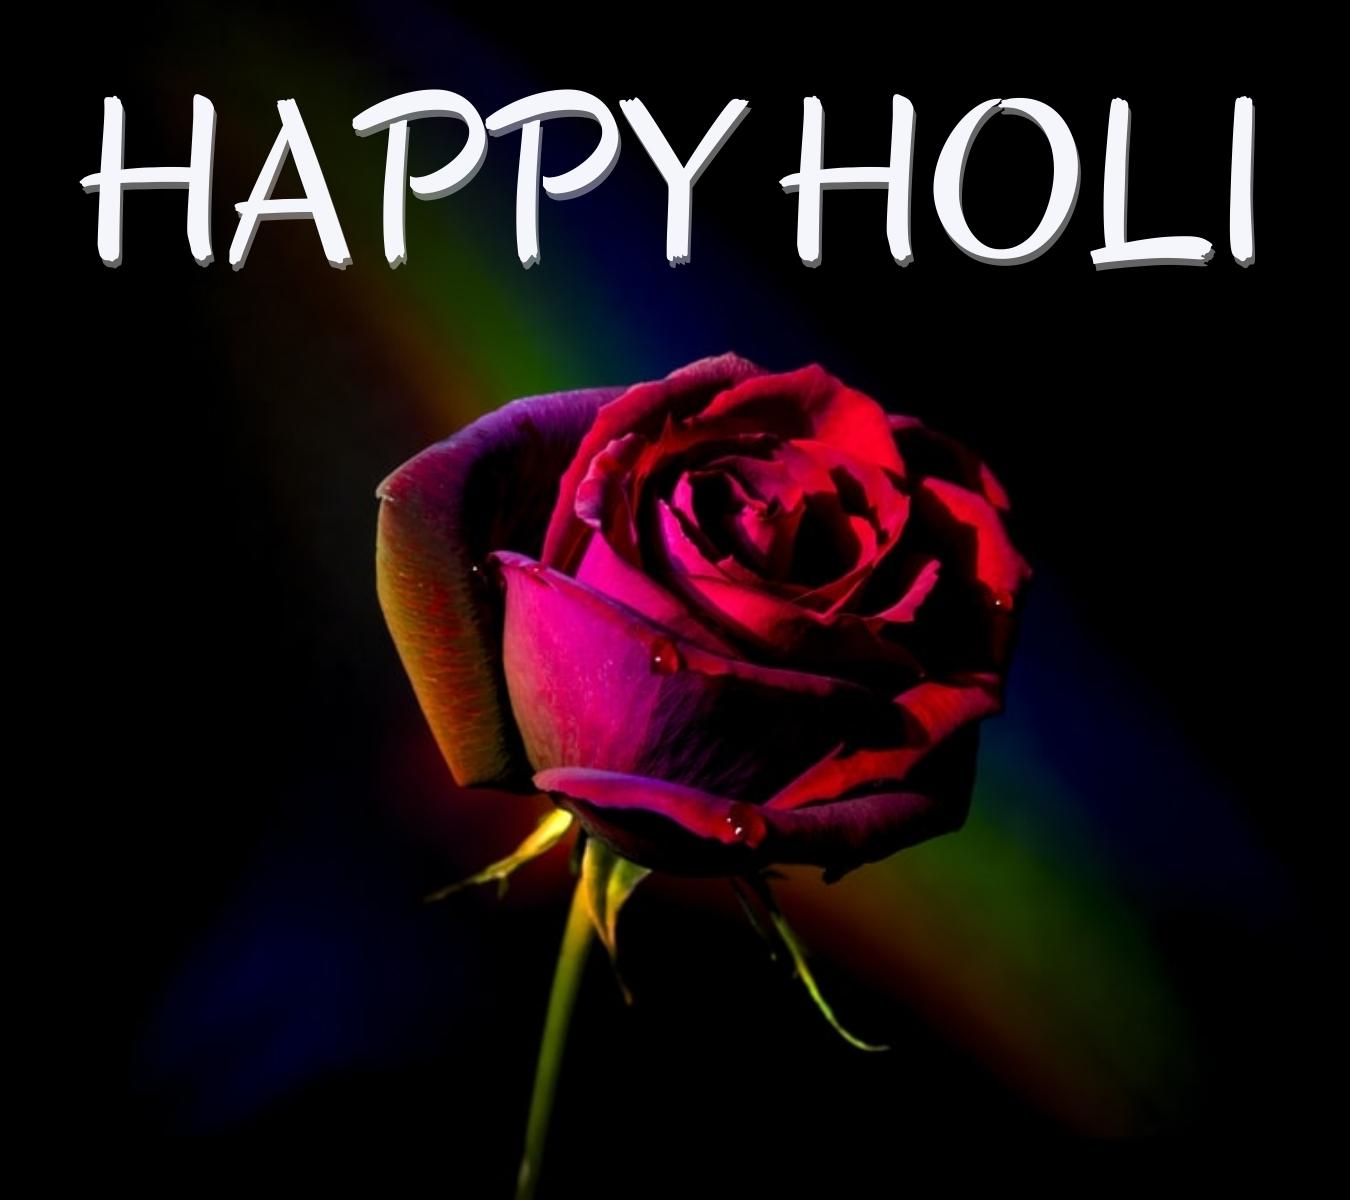 happy holi hd pic with rose download